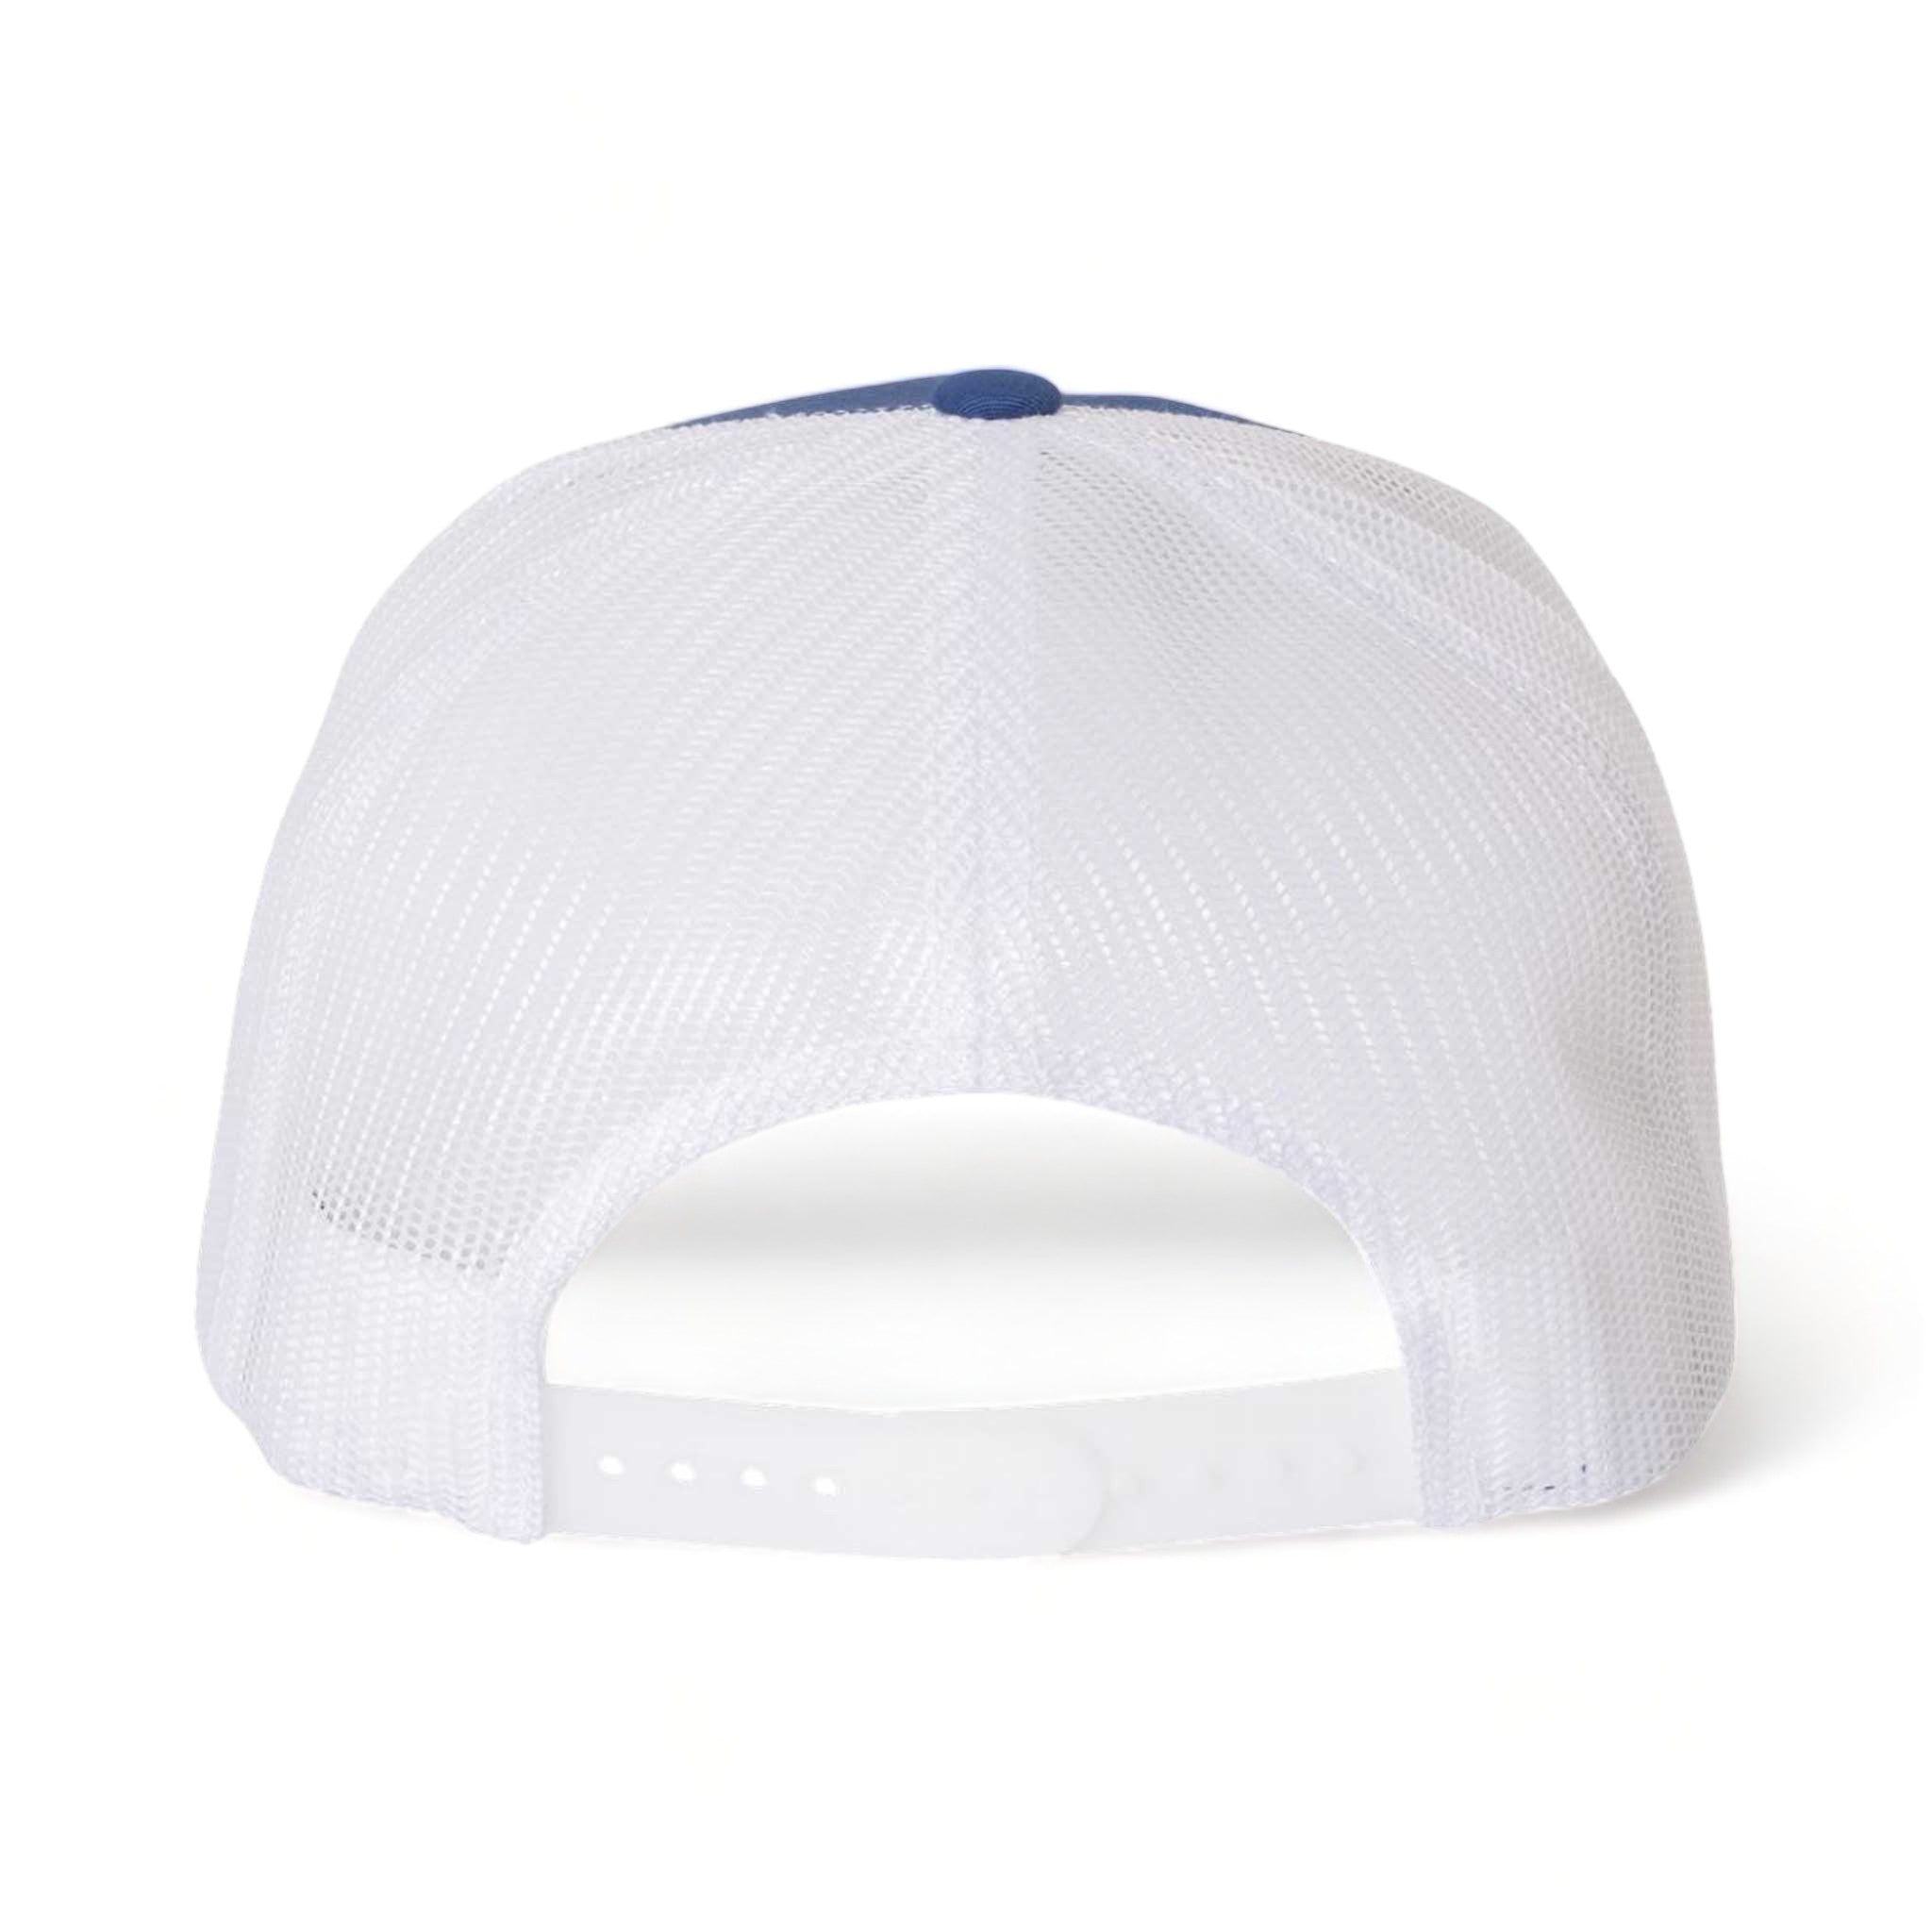 Back view of YP Classics 6006 custom hat in royal and white